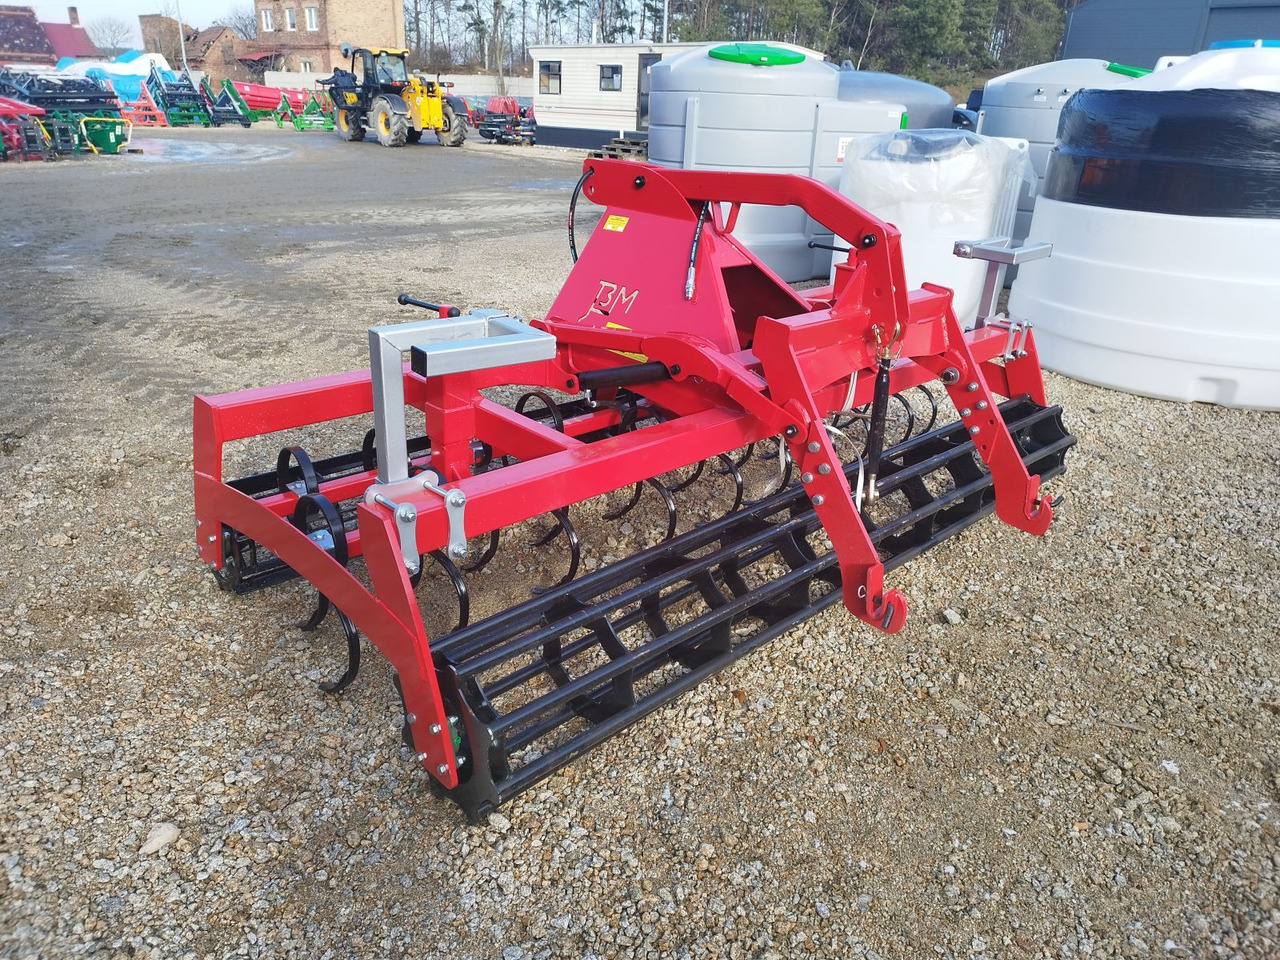 New Combine seed drill Combine Seed Drill 2,7m / Säkombination / Agregat Uprawowo Siewny: picture 13